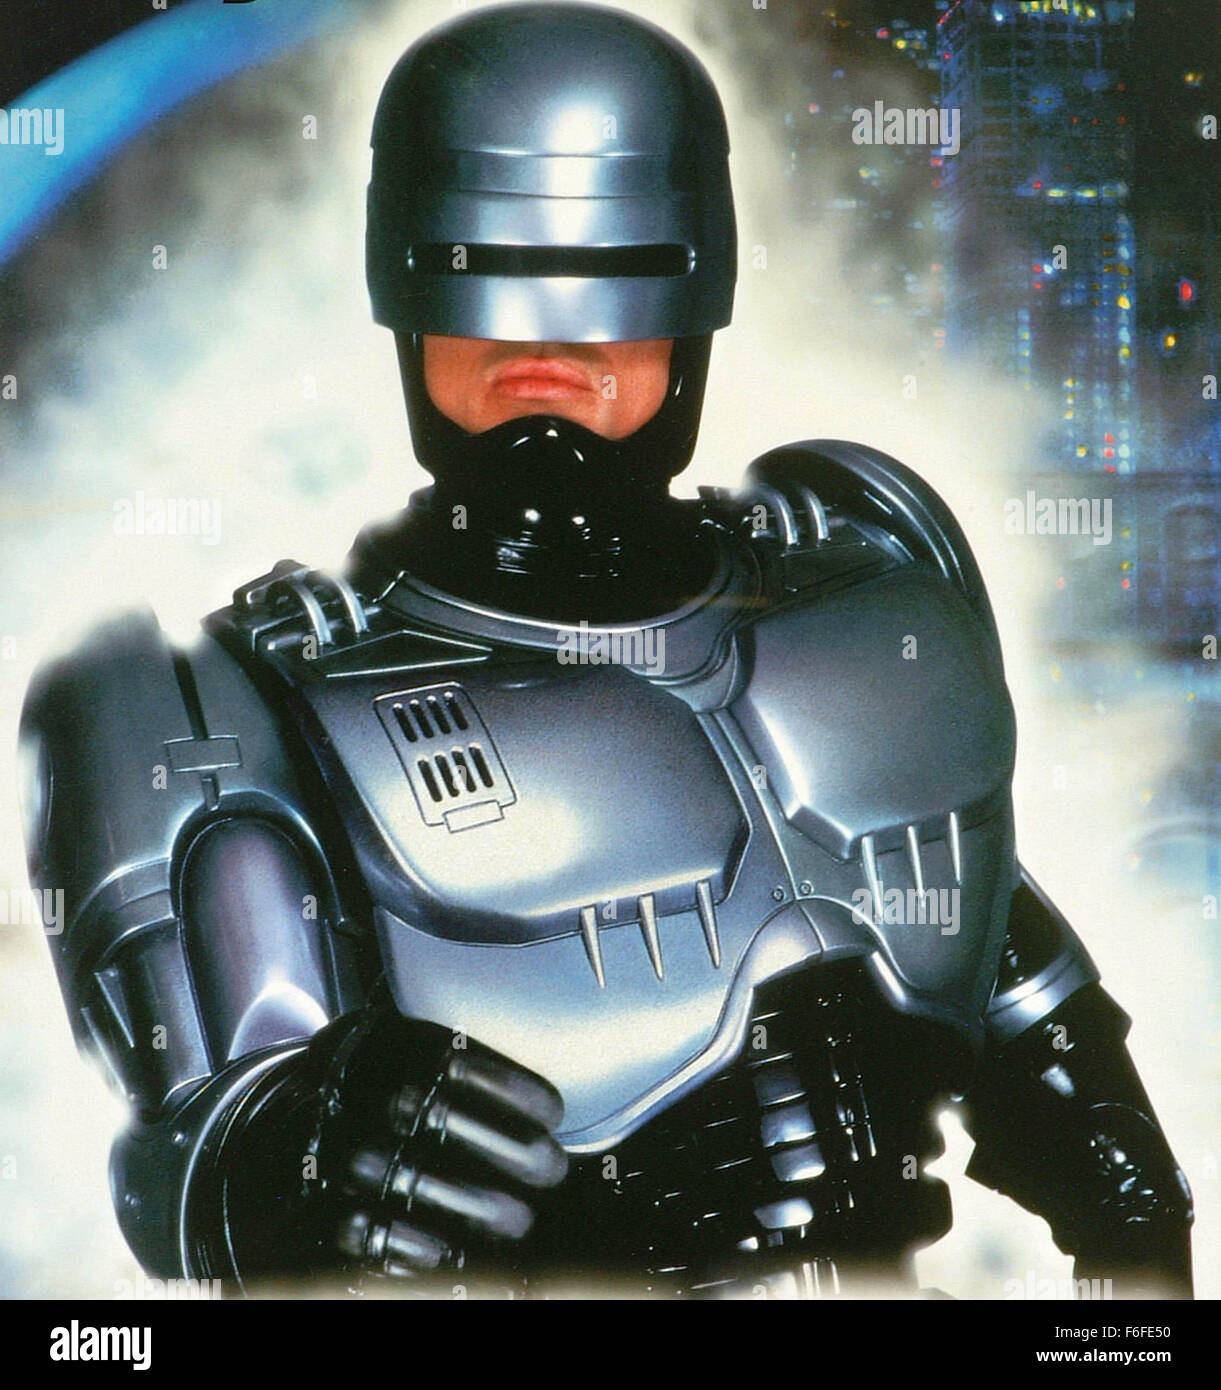 Jul 17, 1987; Dallas, TX, USA; Pictured:  A illustation from 'RoboCop,' a 1987 film directed by PAUL VERHOEVEN and starring PETER WELLER as RoboCop and NANCY ALLEN as Officer Anne Lewis. Stock Photo